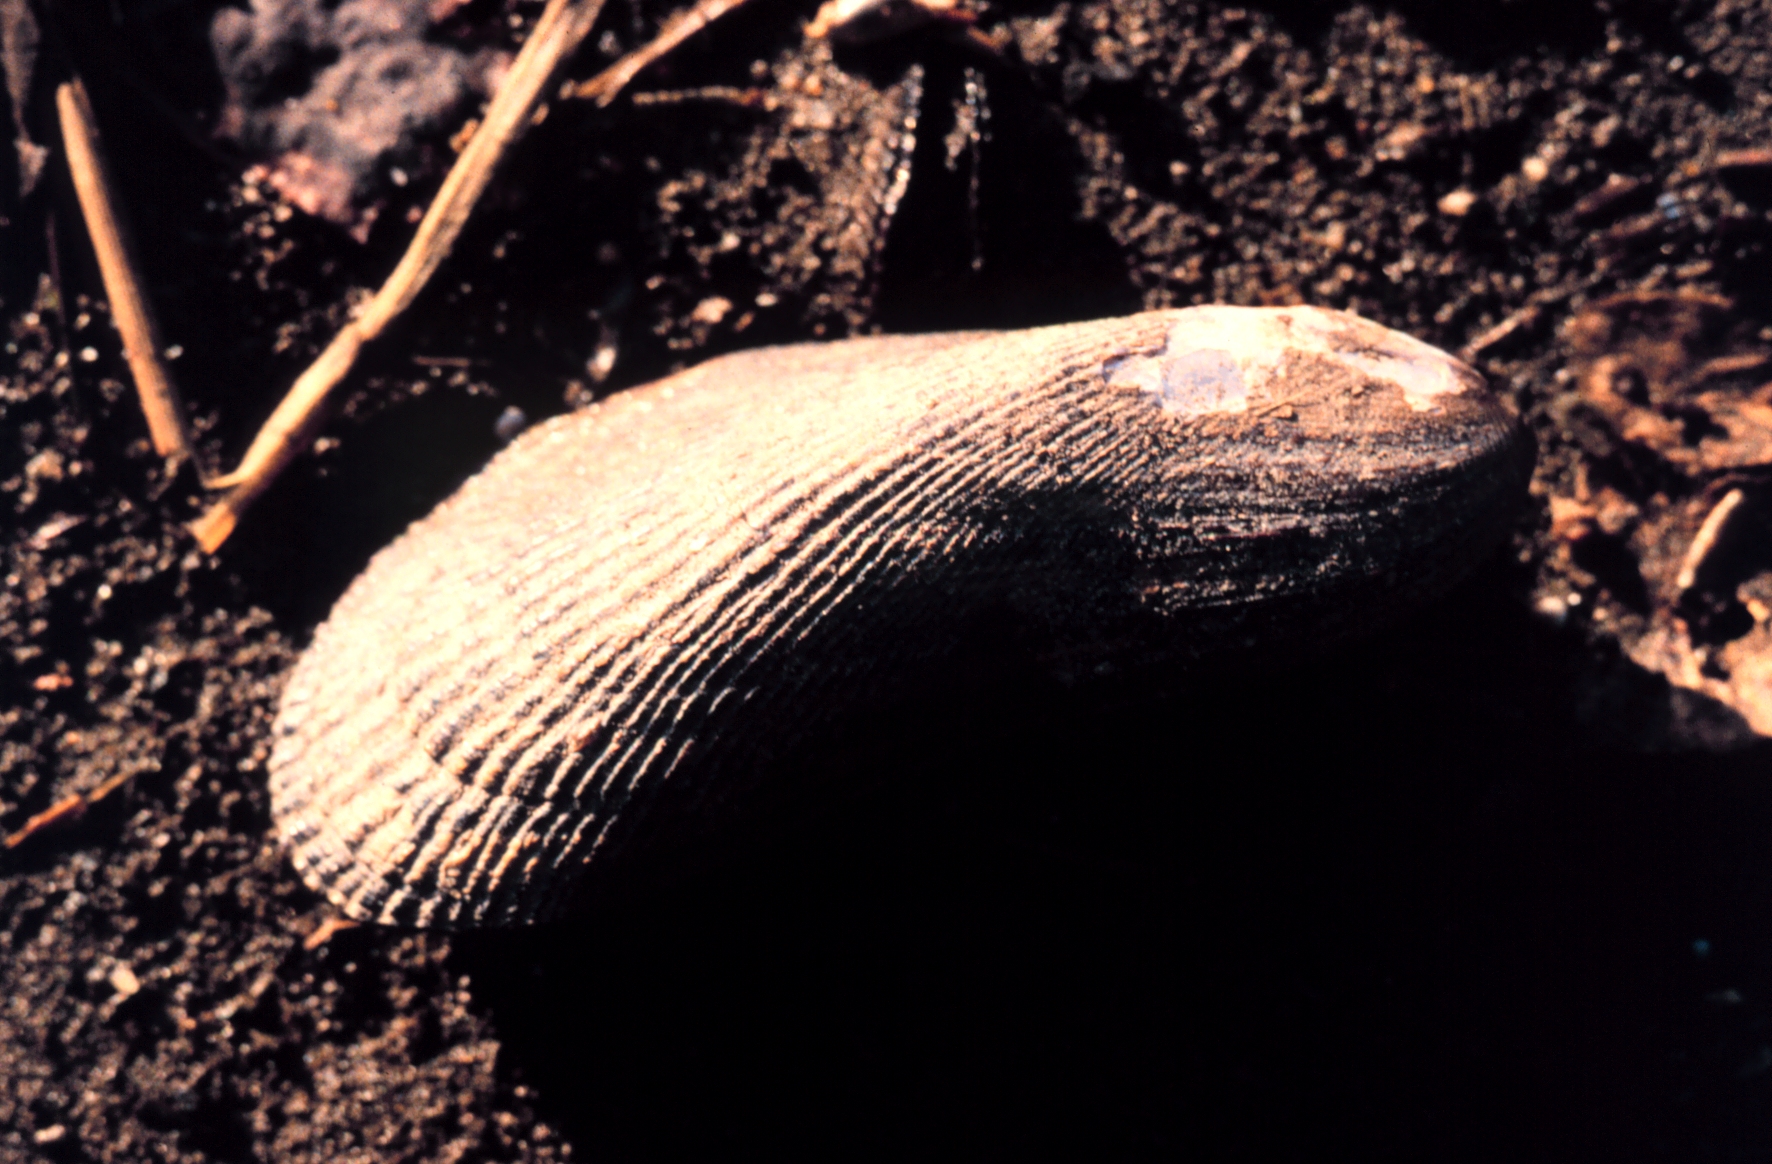 Link to ribbed mussel photo on Wikimedia Commons